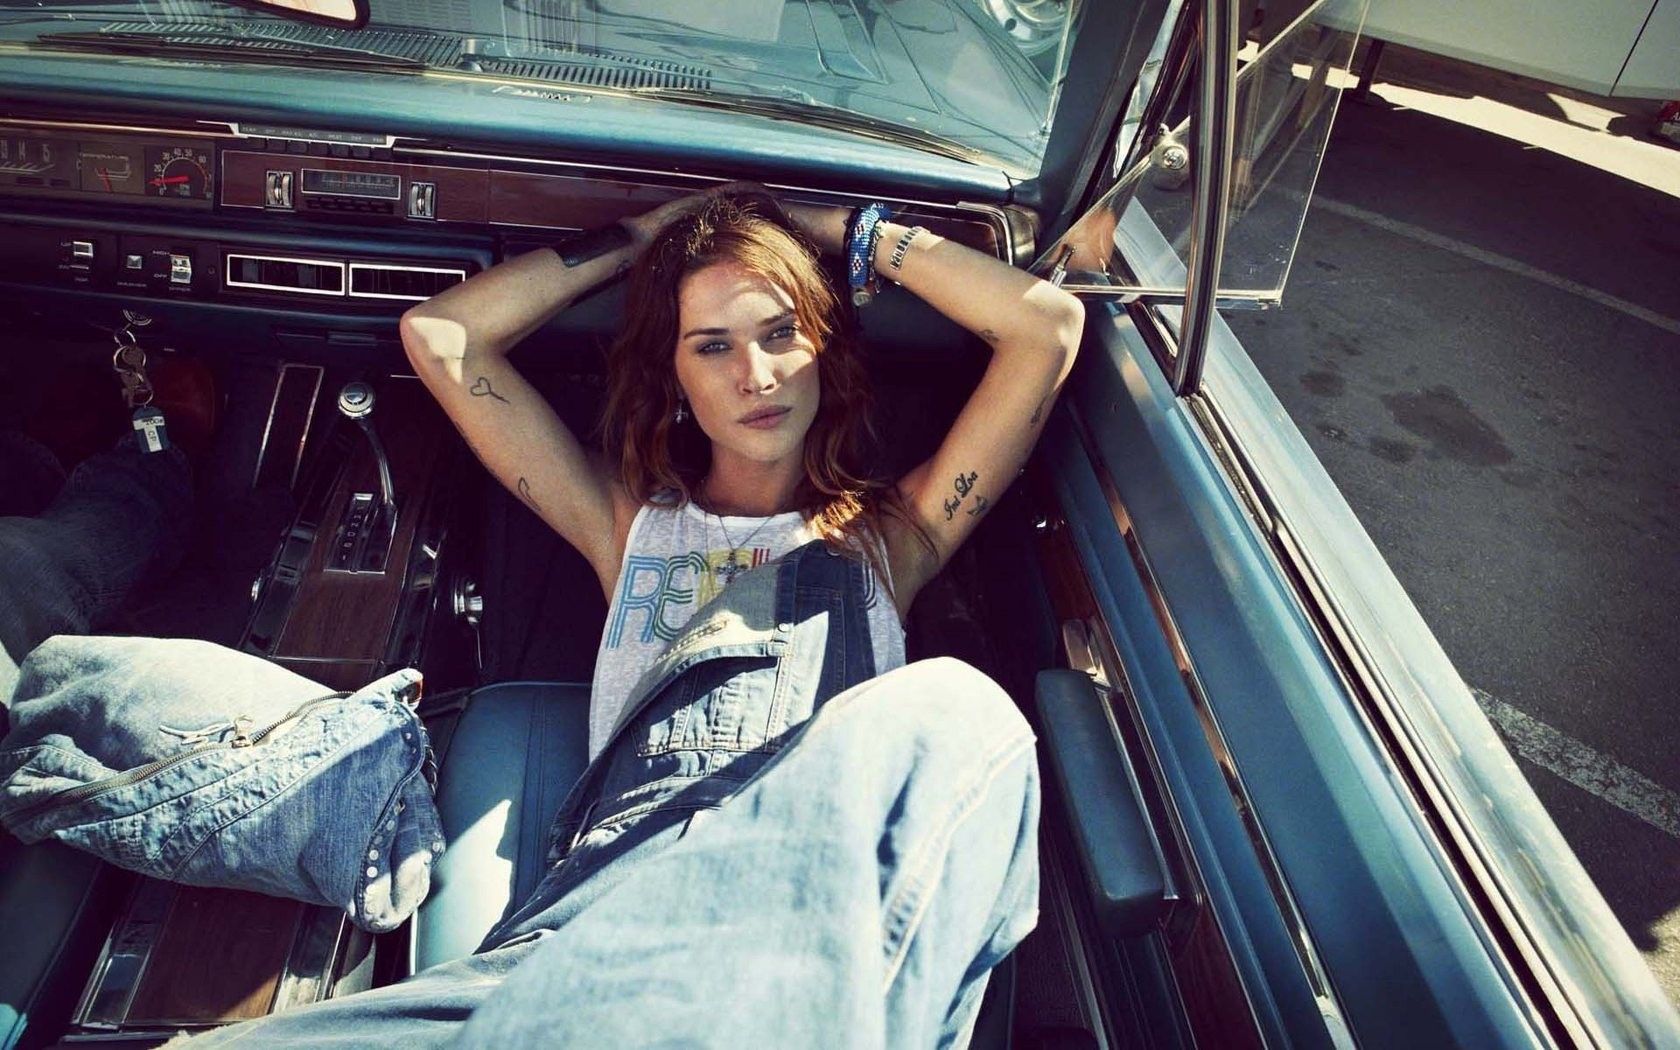 brunettes, women, artistic, photography, models, girls with cars